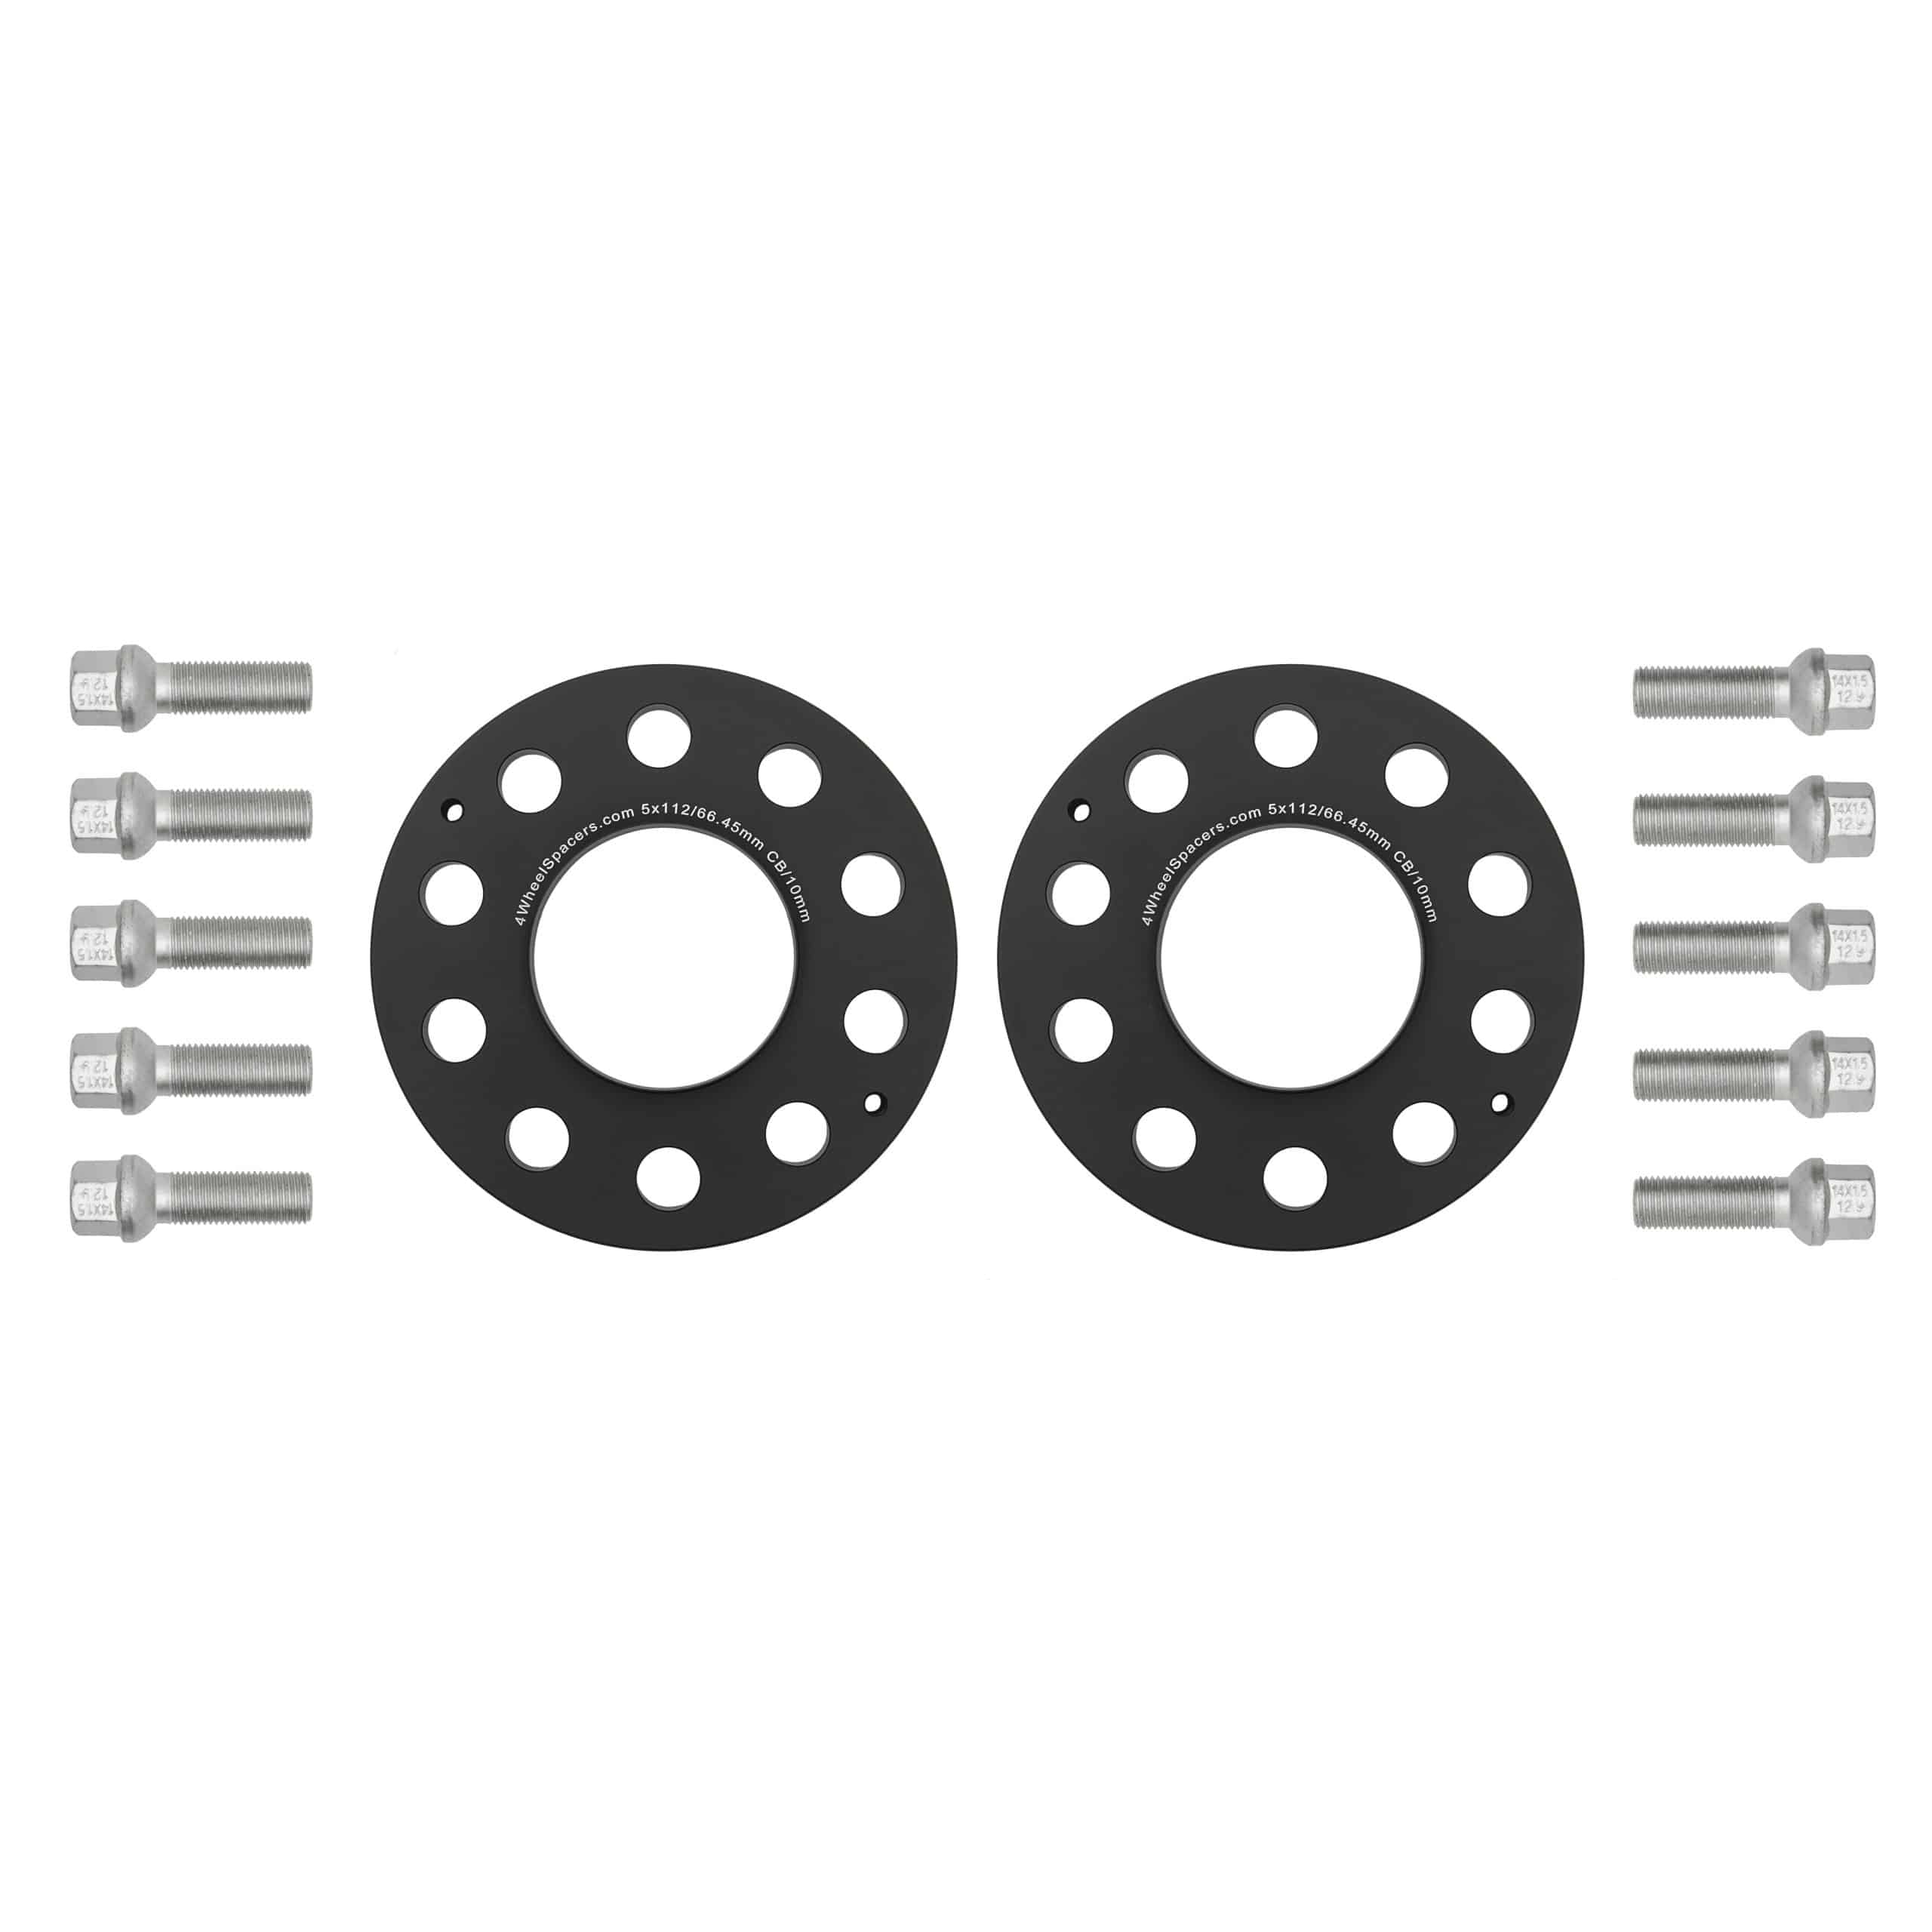 Mercedes-Benz 10mm Hub-Centric Wheel Spacers With Ball Seat Bolt Kit, 4WheelSpacers.com